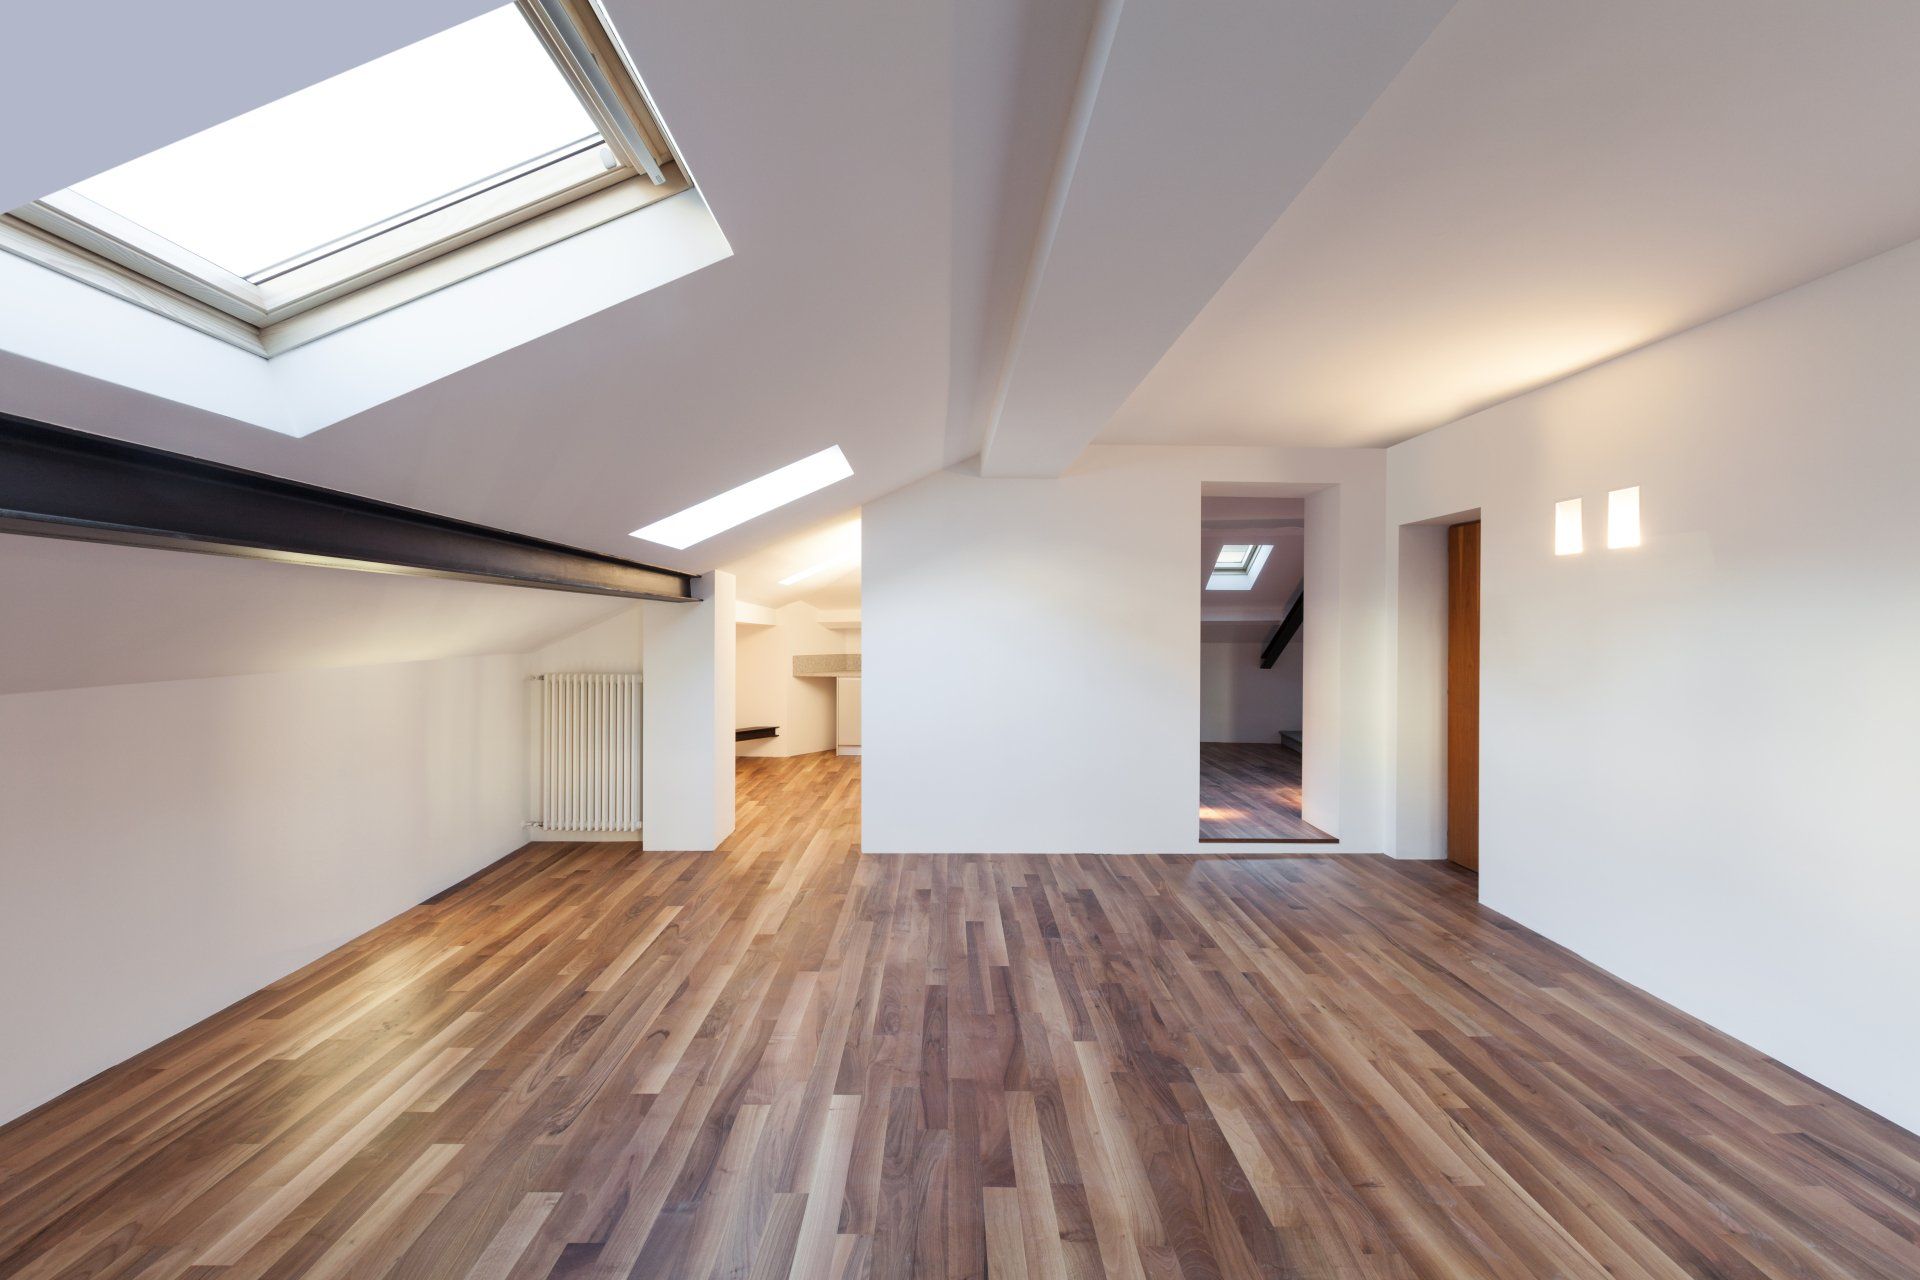 An empty room with hardwood floors and a skylight in the ceiling.